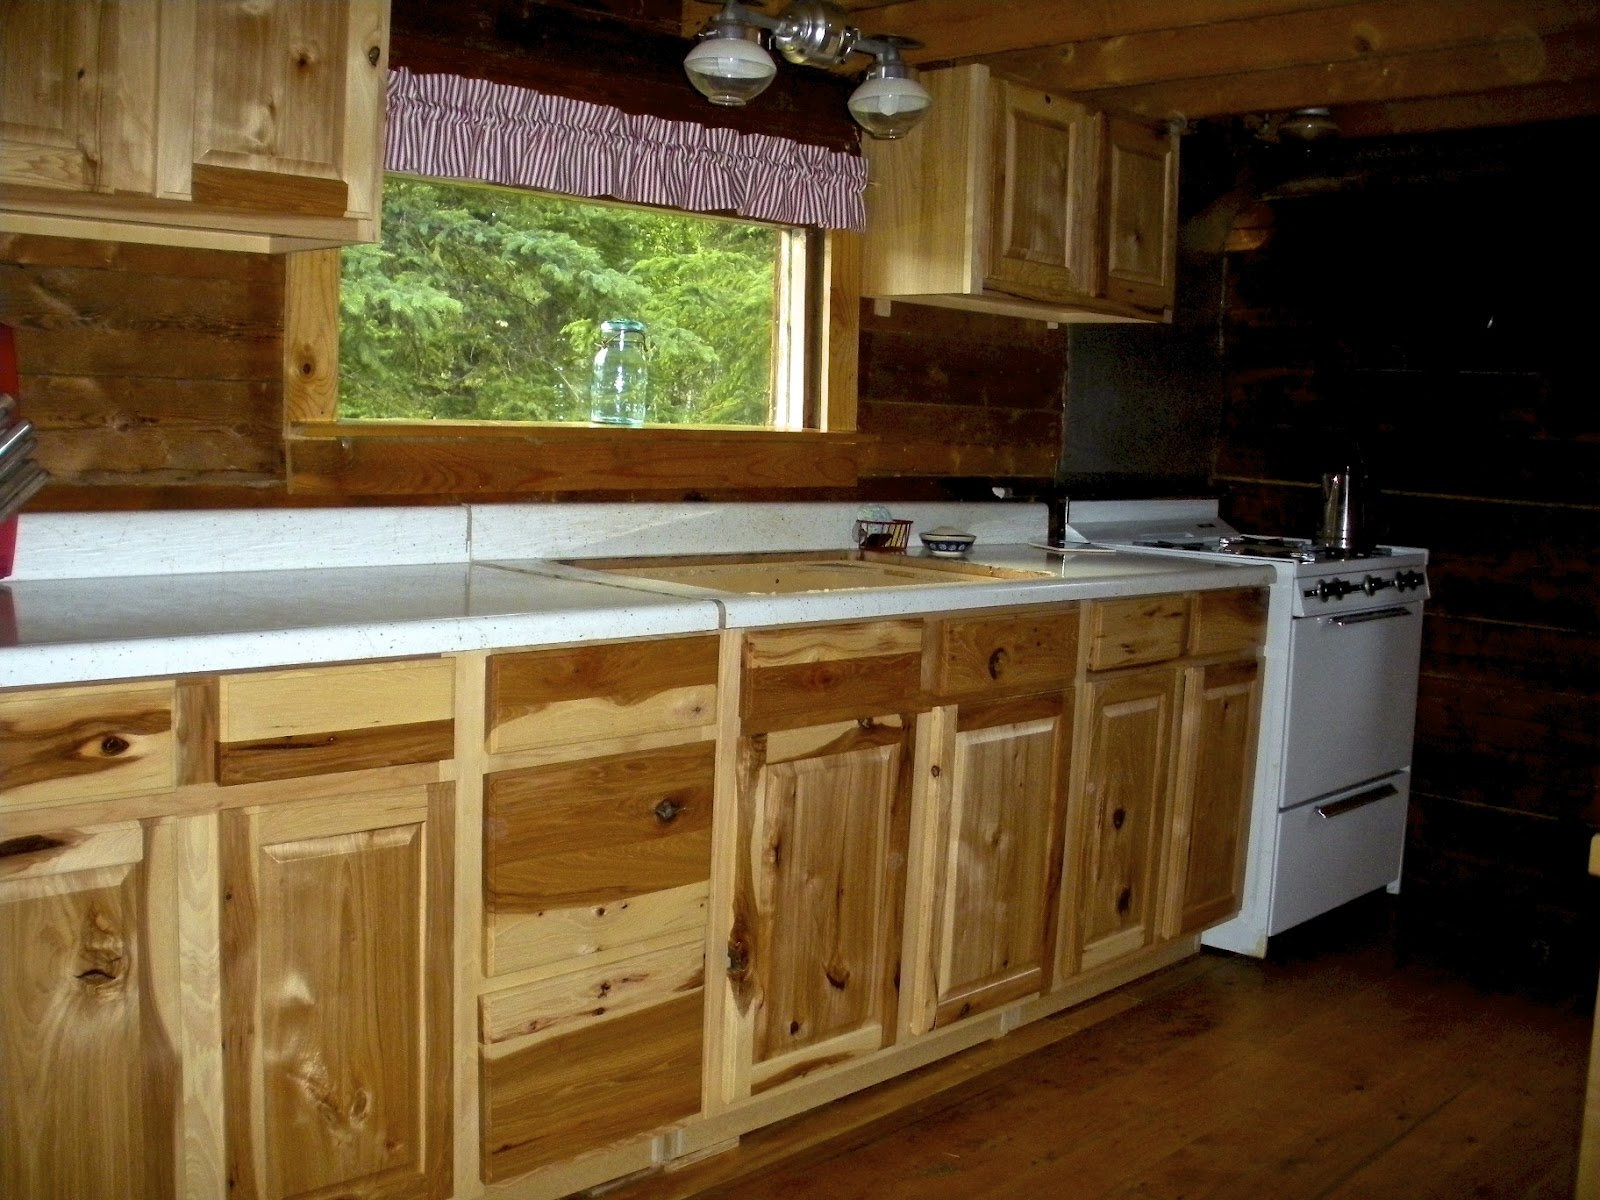 Lowe's Kitchen Cabinets (Hickory) Cabin Style | Explore ...